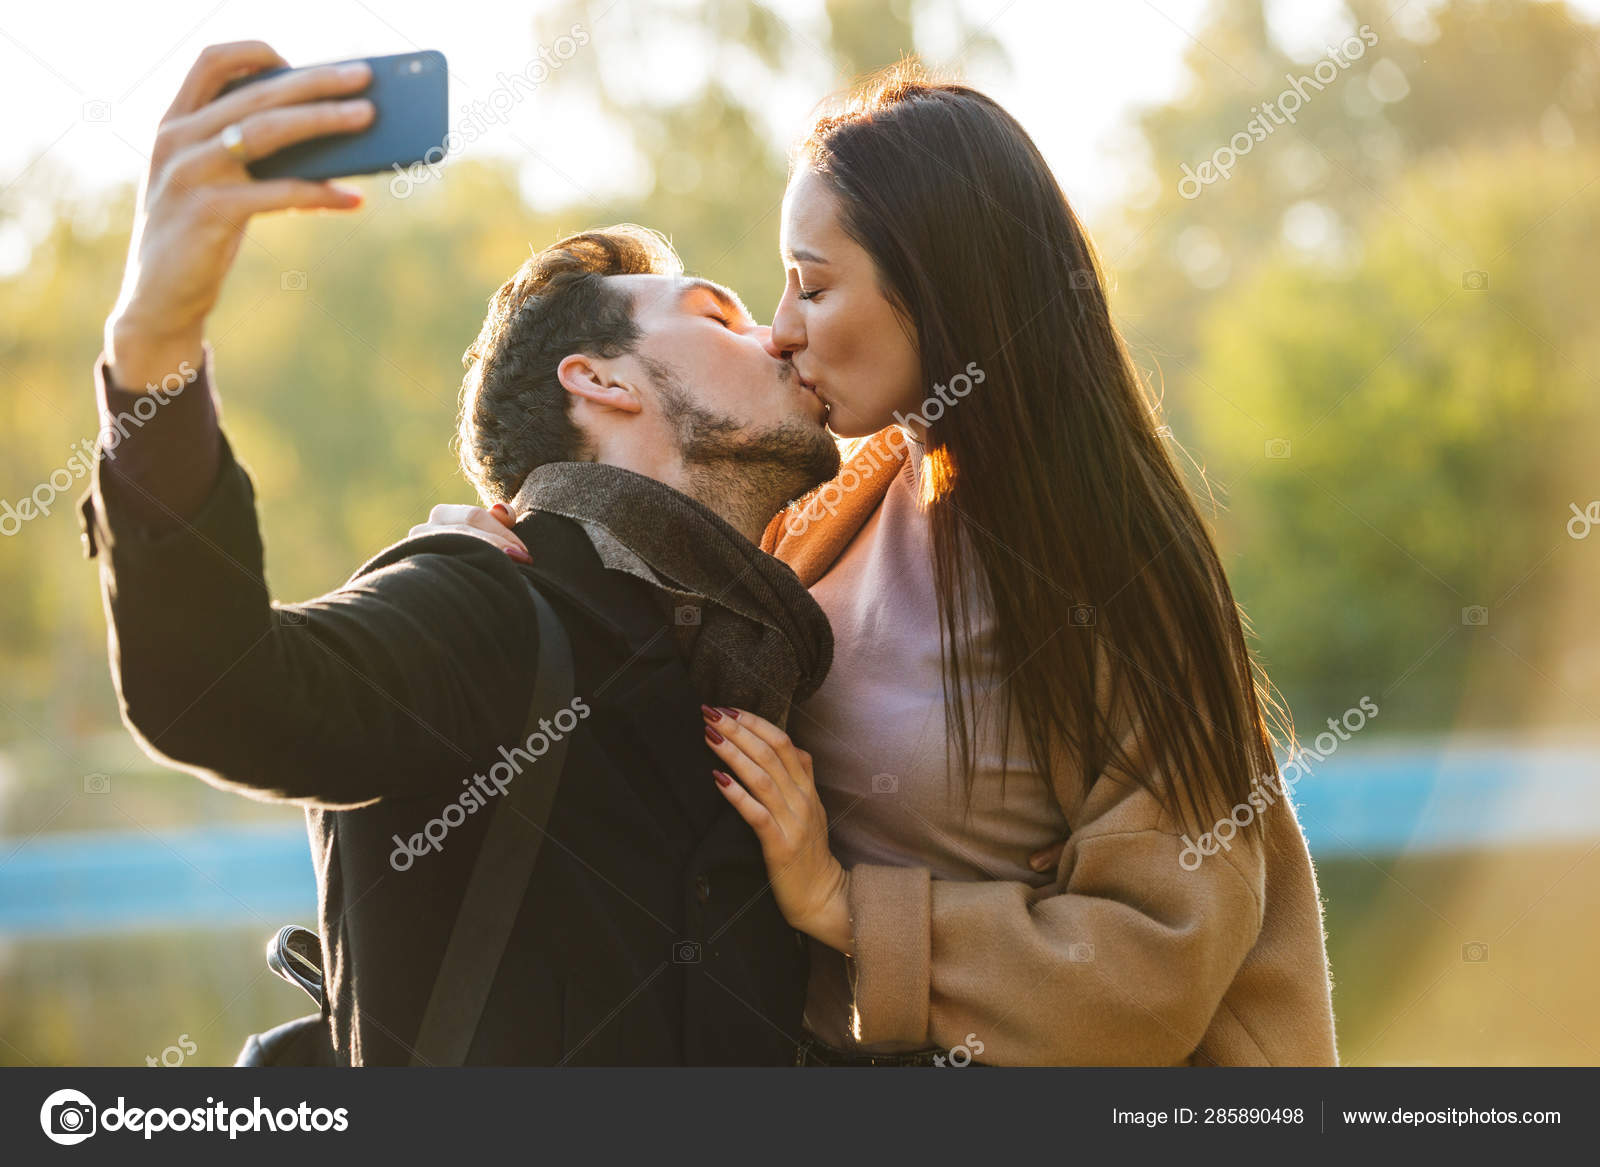 Stylish Indian Hindu Couple Posed On Street And Looking At Mobile Phone And  Makes Selfie Together. Stock Photo, Picture and Royalty Free Image. Image  111305058.